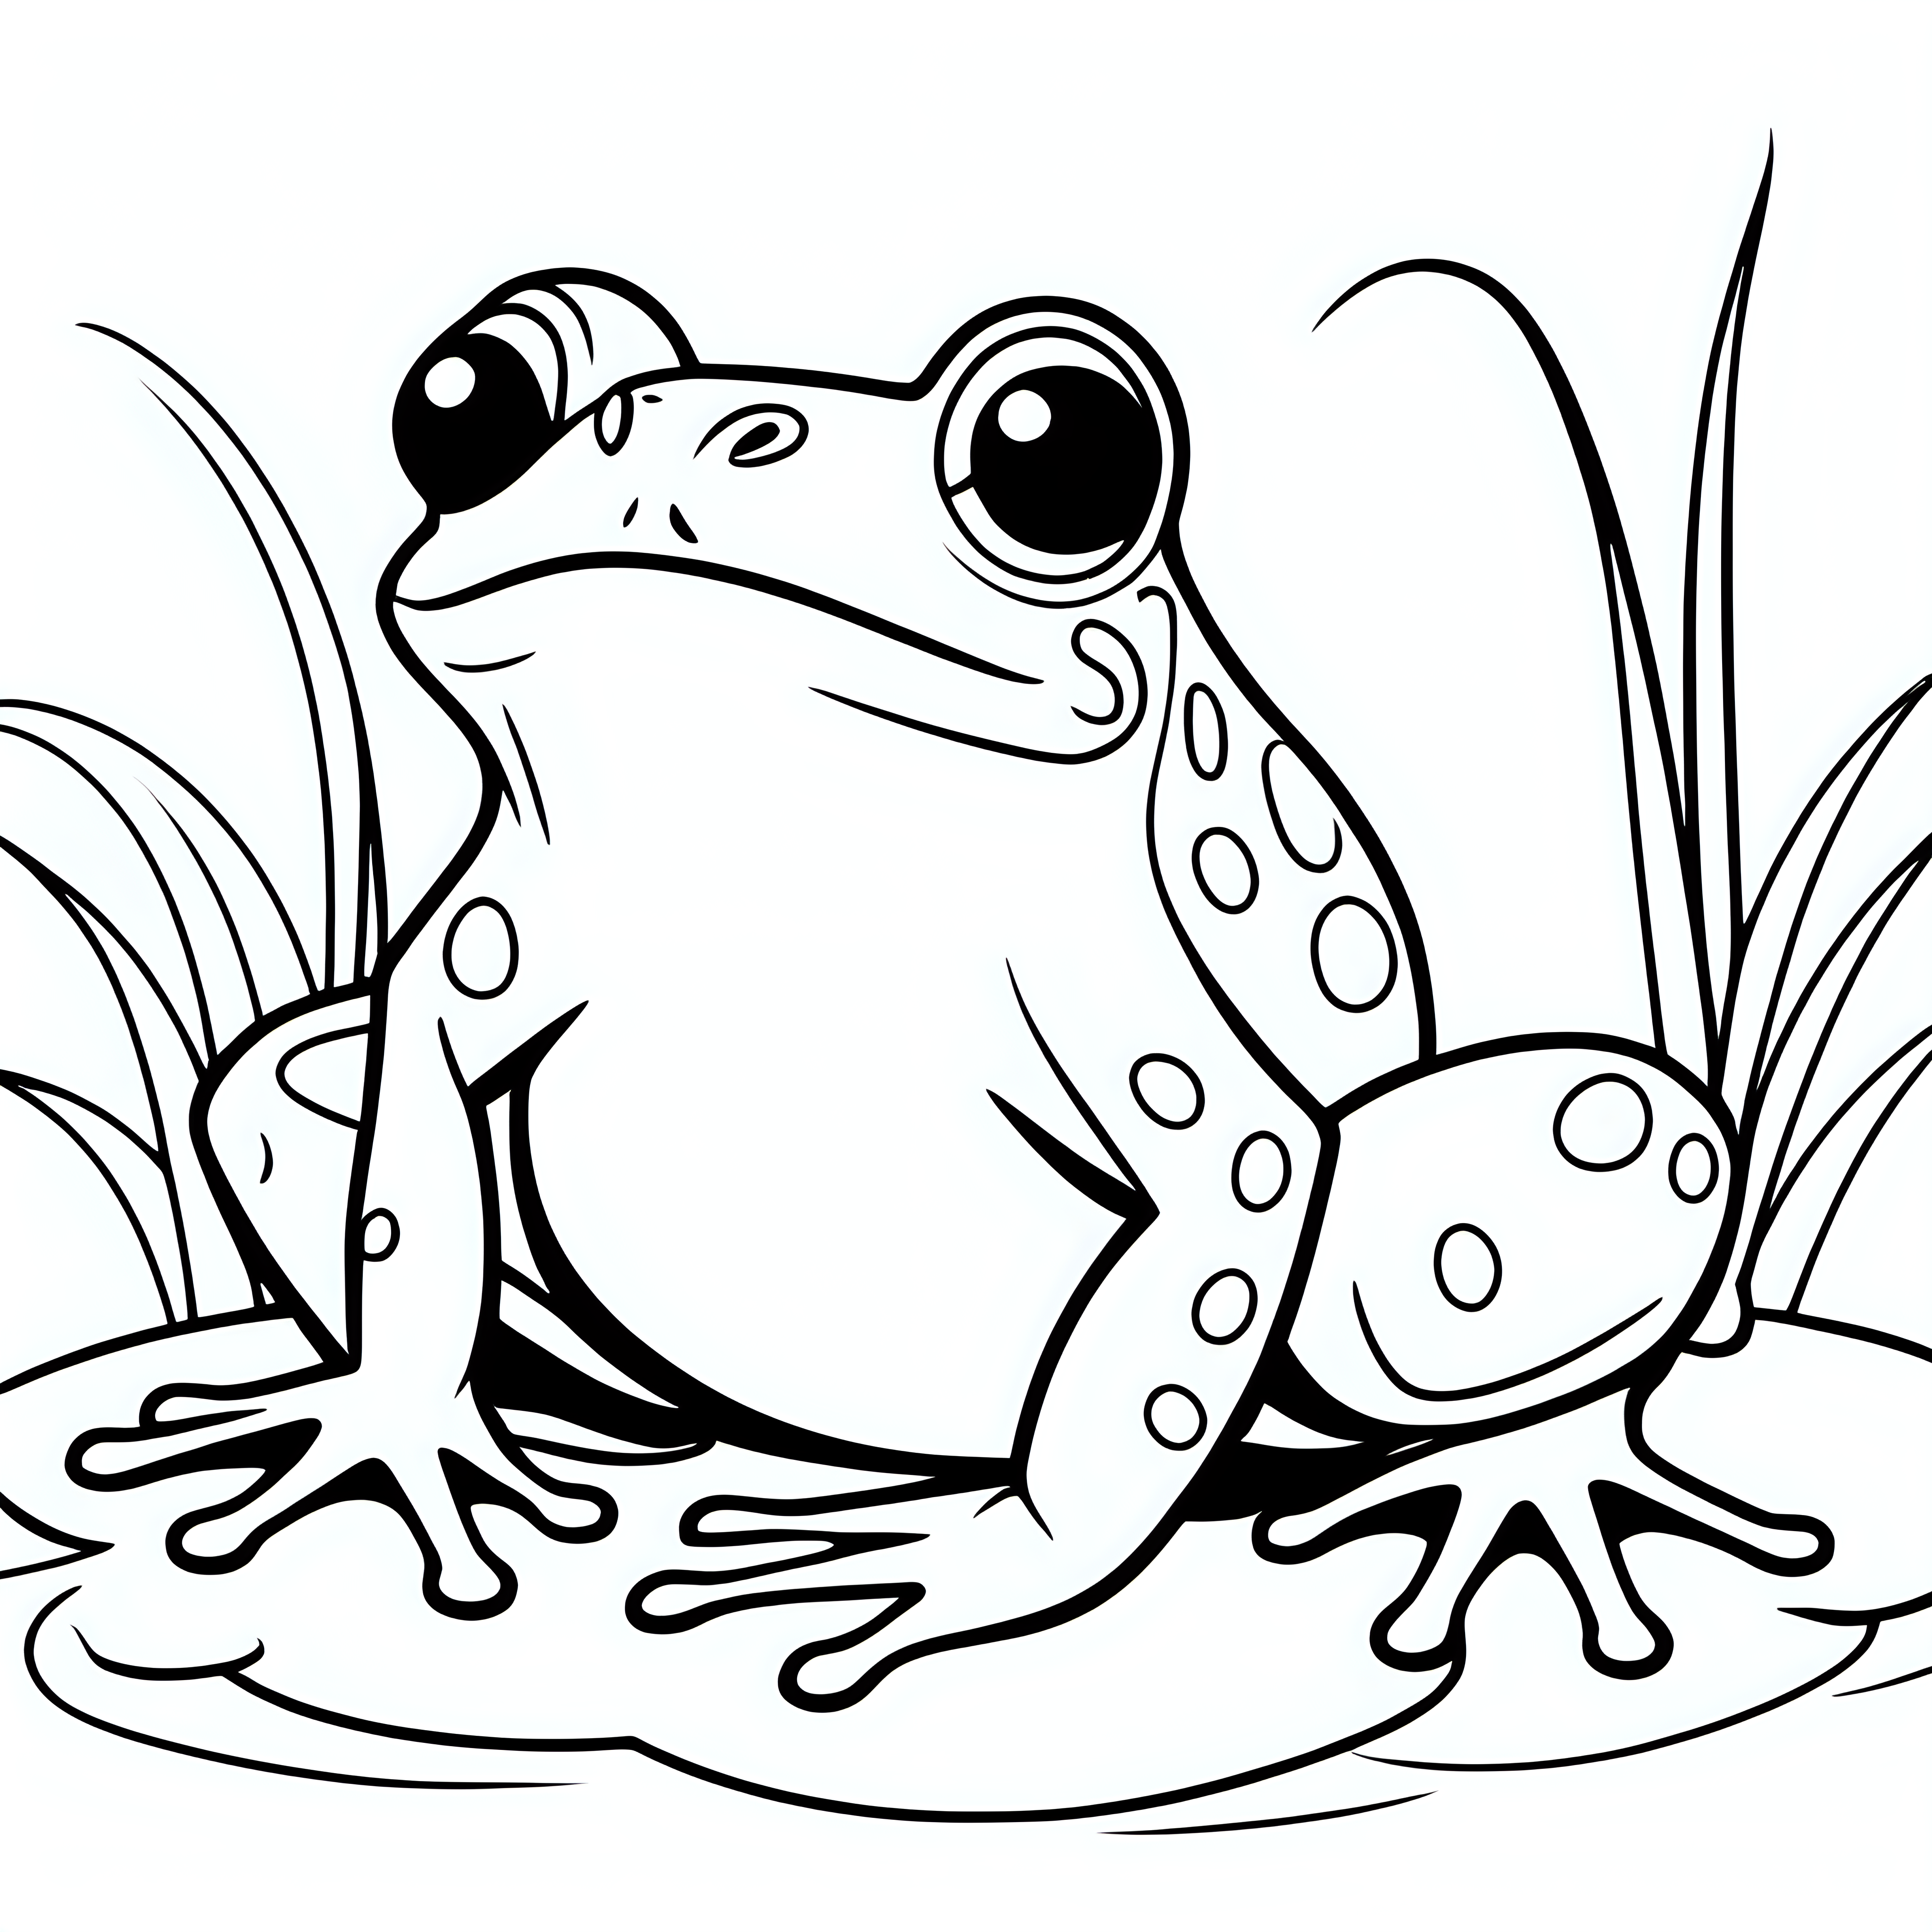 draw a cute frog animal with only the